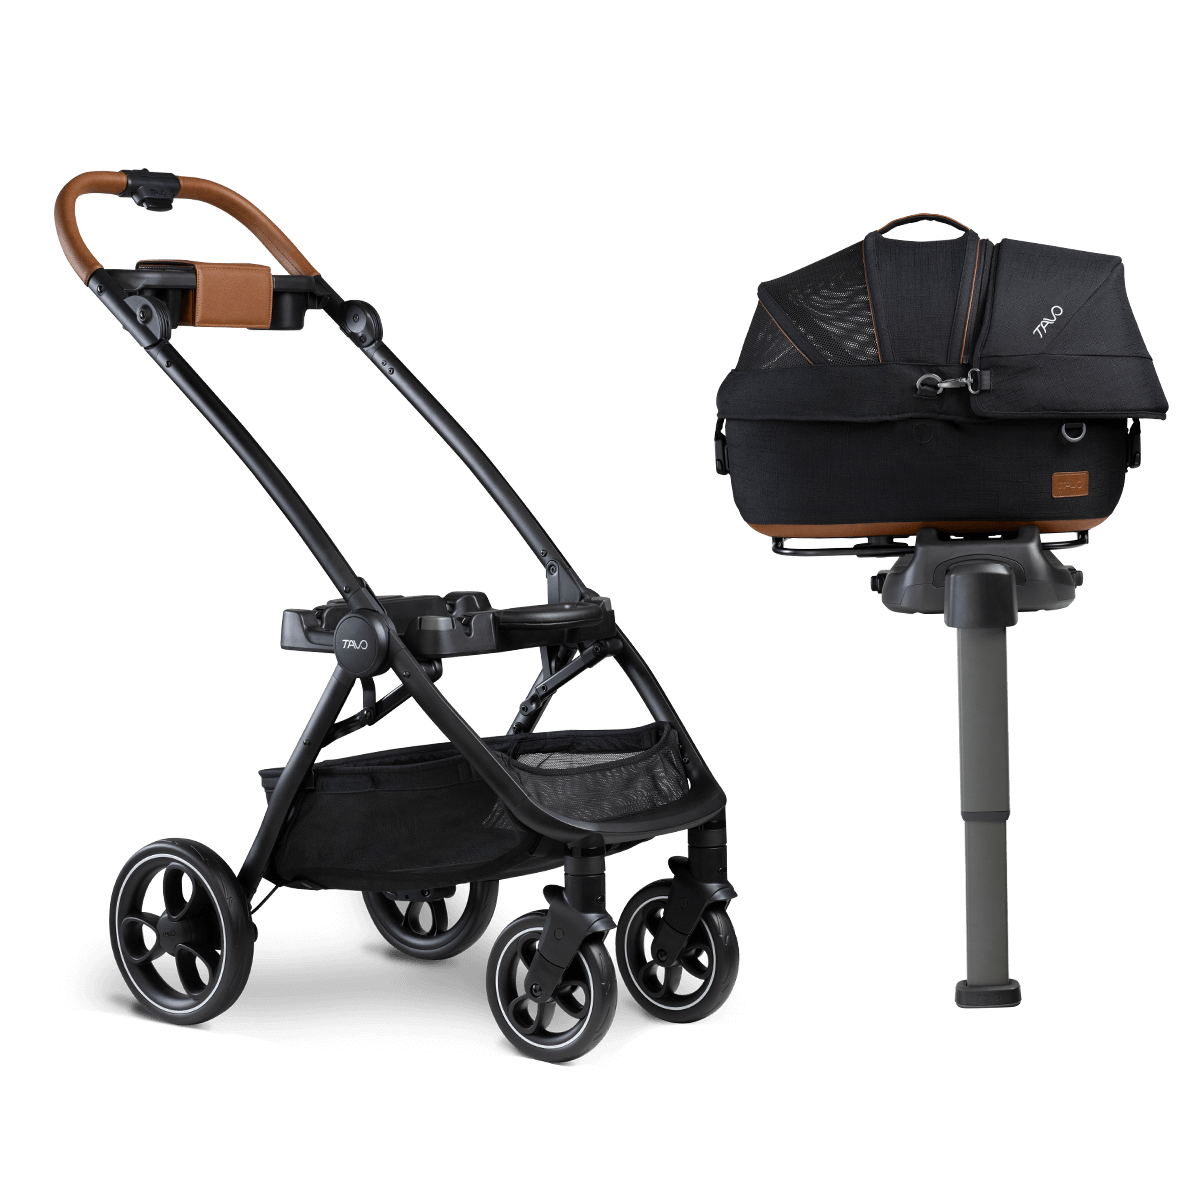 small pet carrier on vehicle base and stroller frame